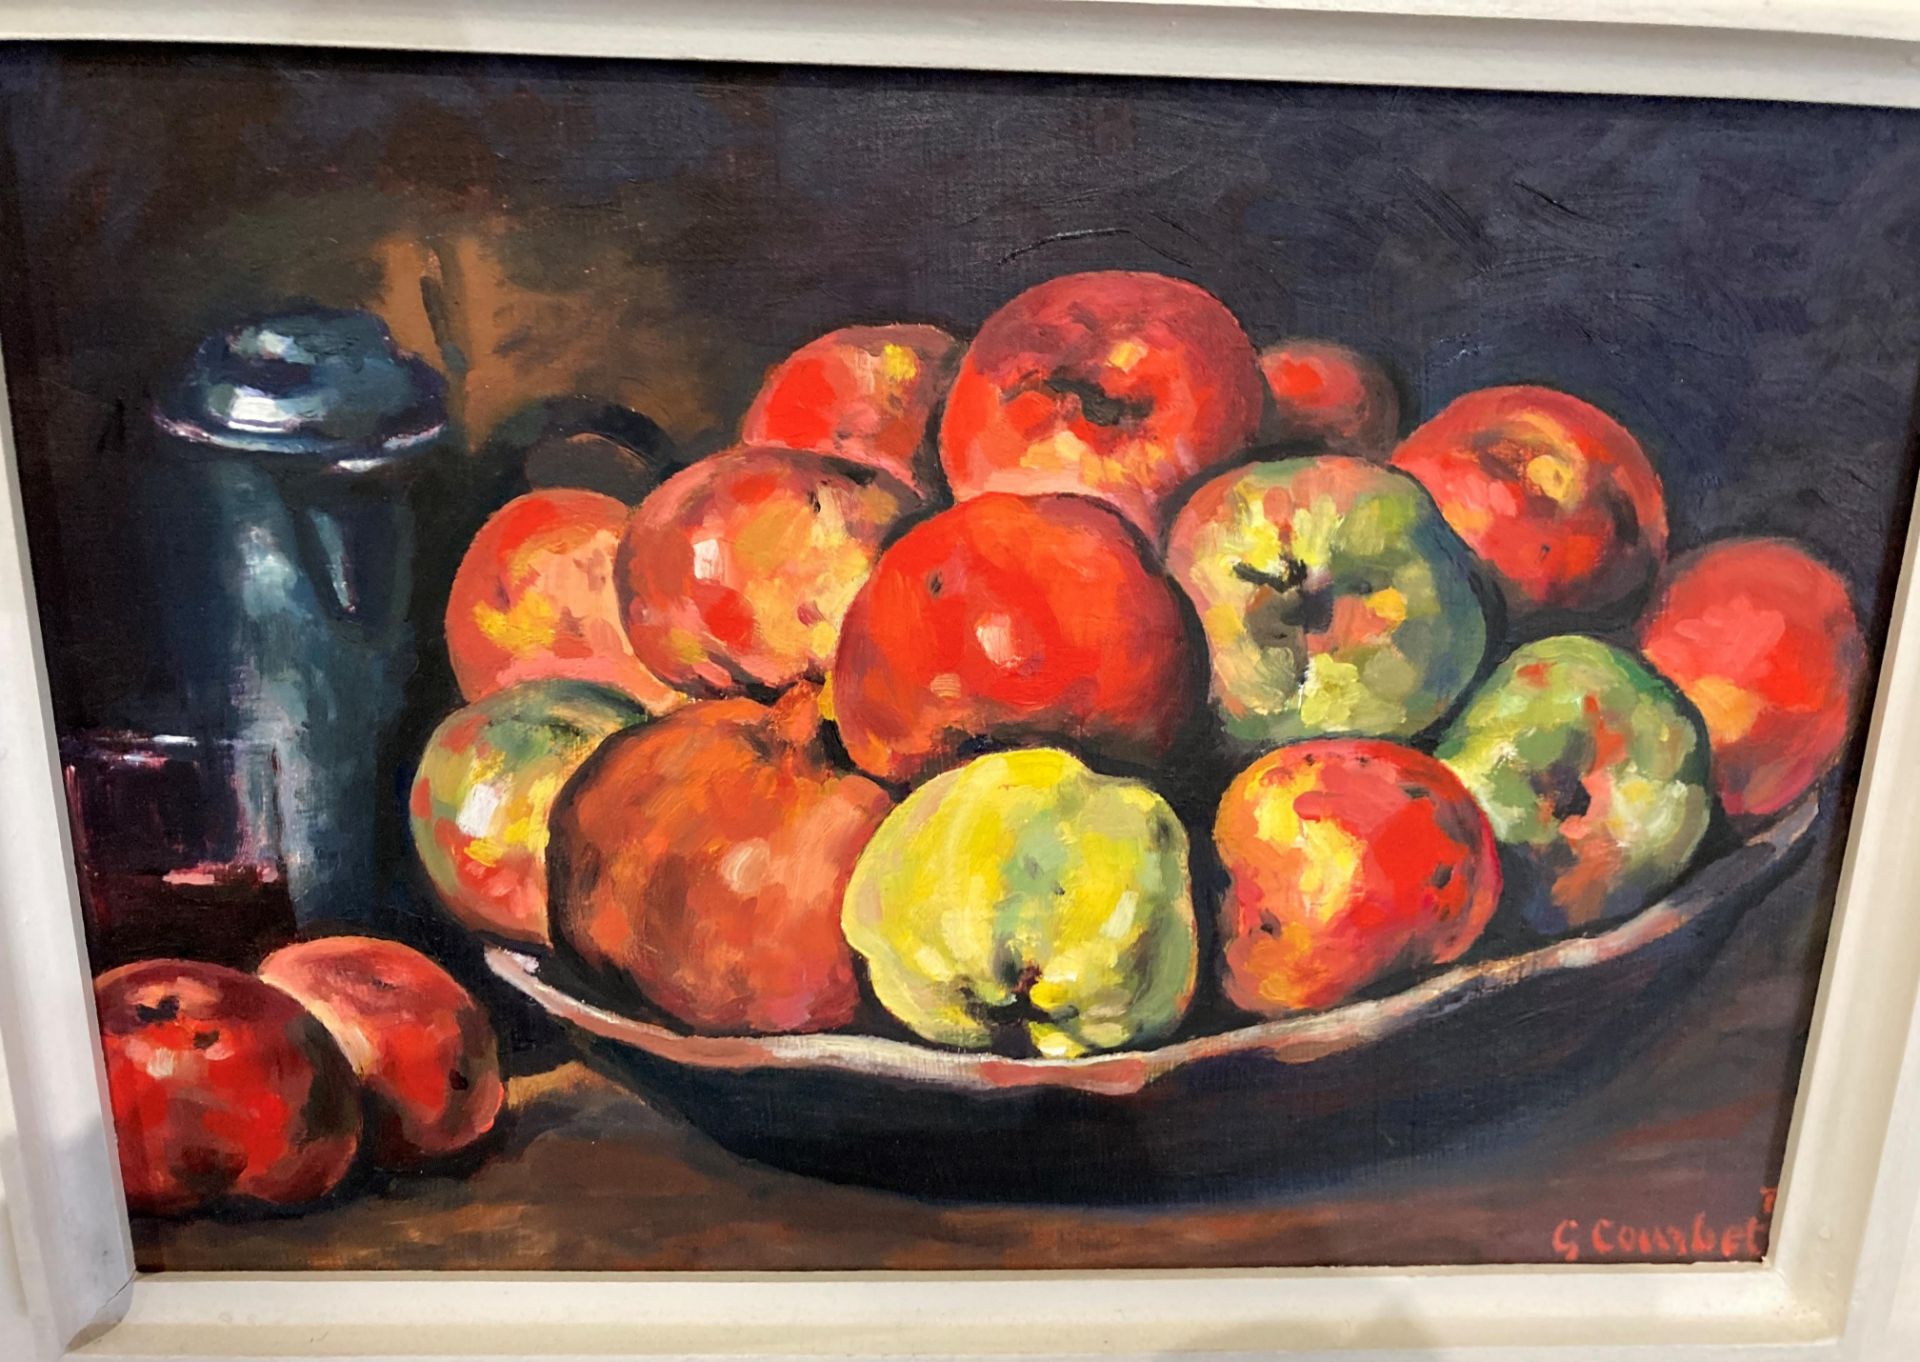 Copy of Gustav Courbet's 'Still Life with Apples and a Pomegranate', framed oil on board, - Image 2 of 3